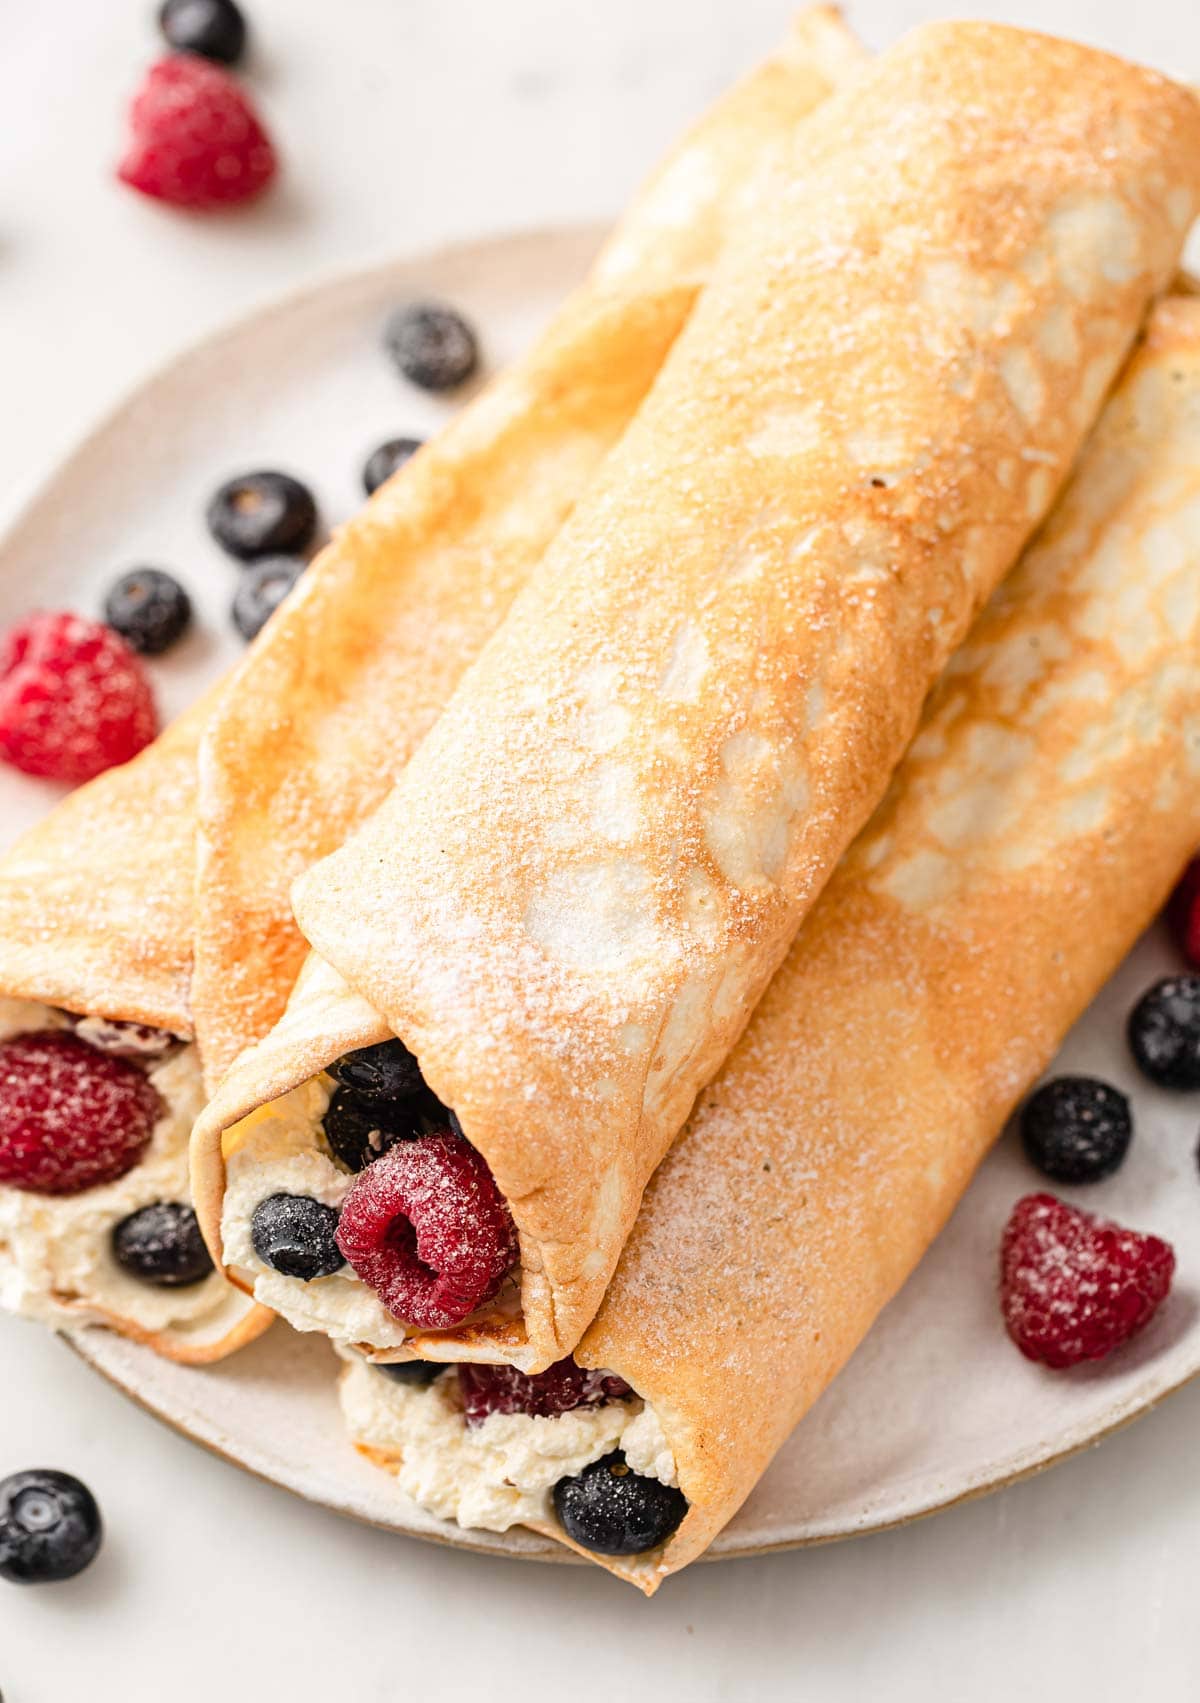 three crepes rolled up and stacked on a plate filled with cream and berries